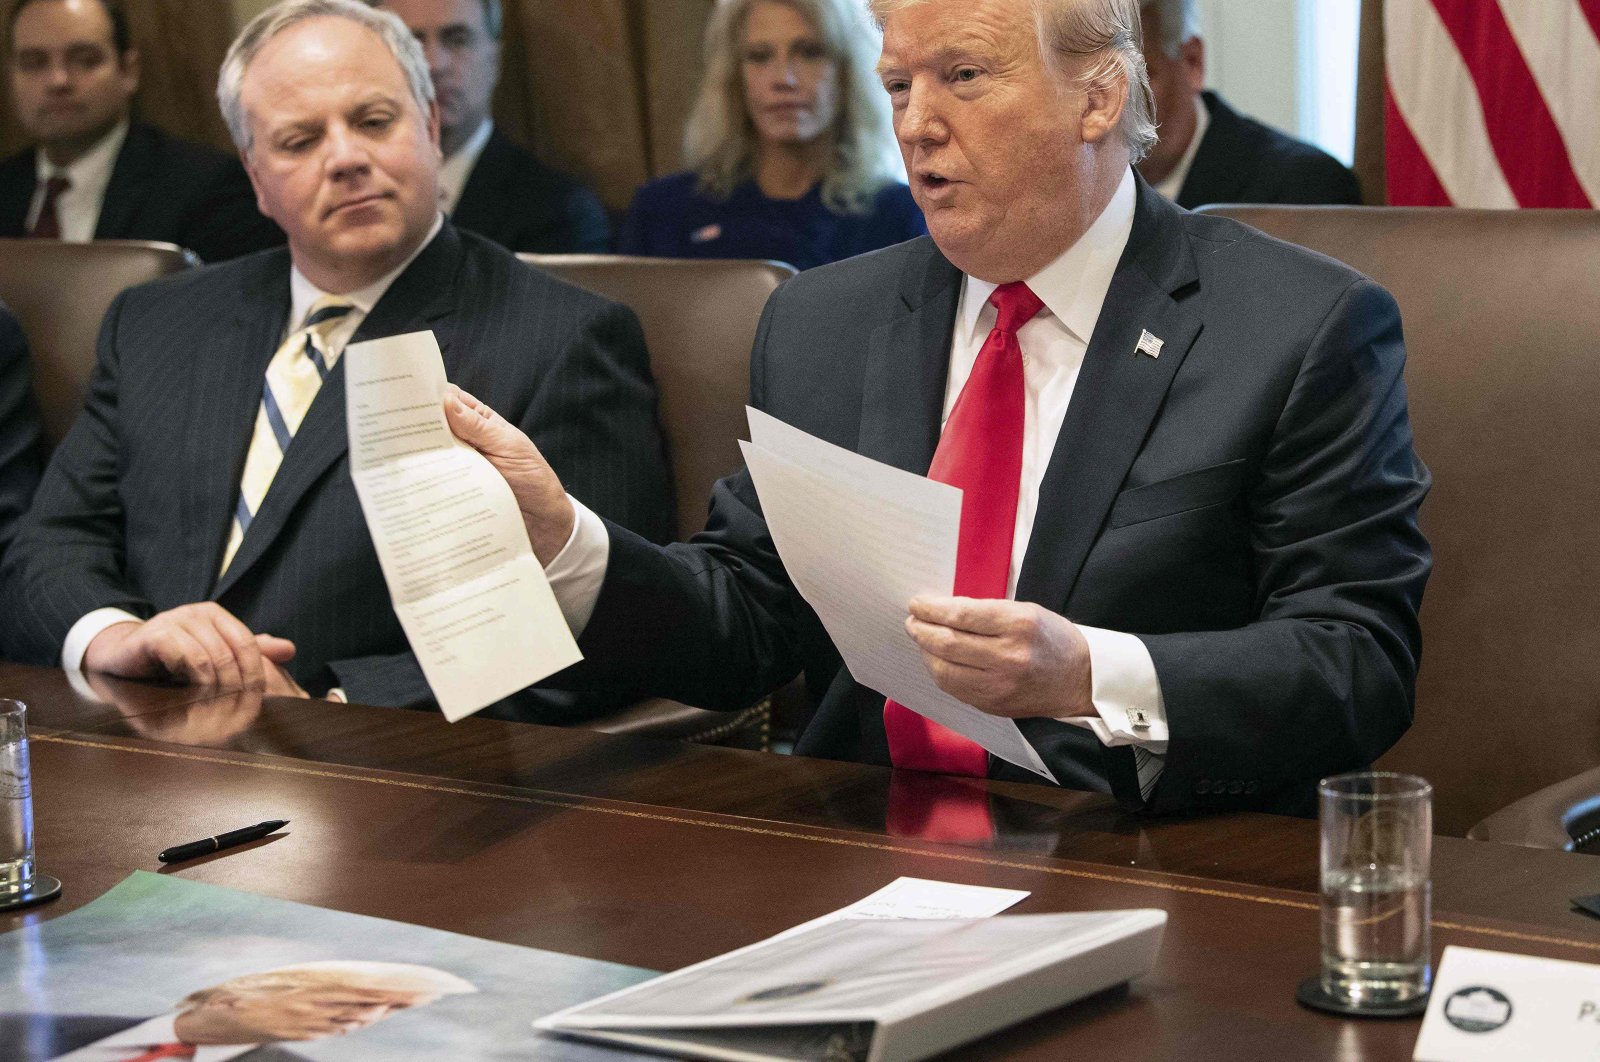 In this file photo, former U.S. President Donald Trump shows a letter he said was from North Korean leader Kim Jong Un during a Cabinet meeting at the White House in Washington, D.C., Jan. 2, 2019. (Photo via AFP)